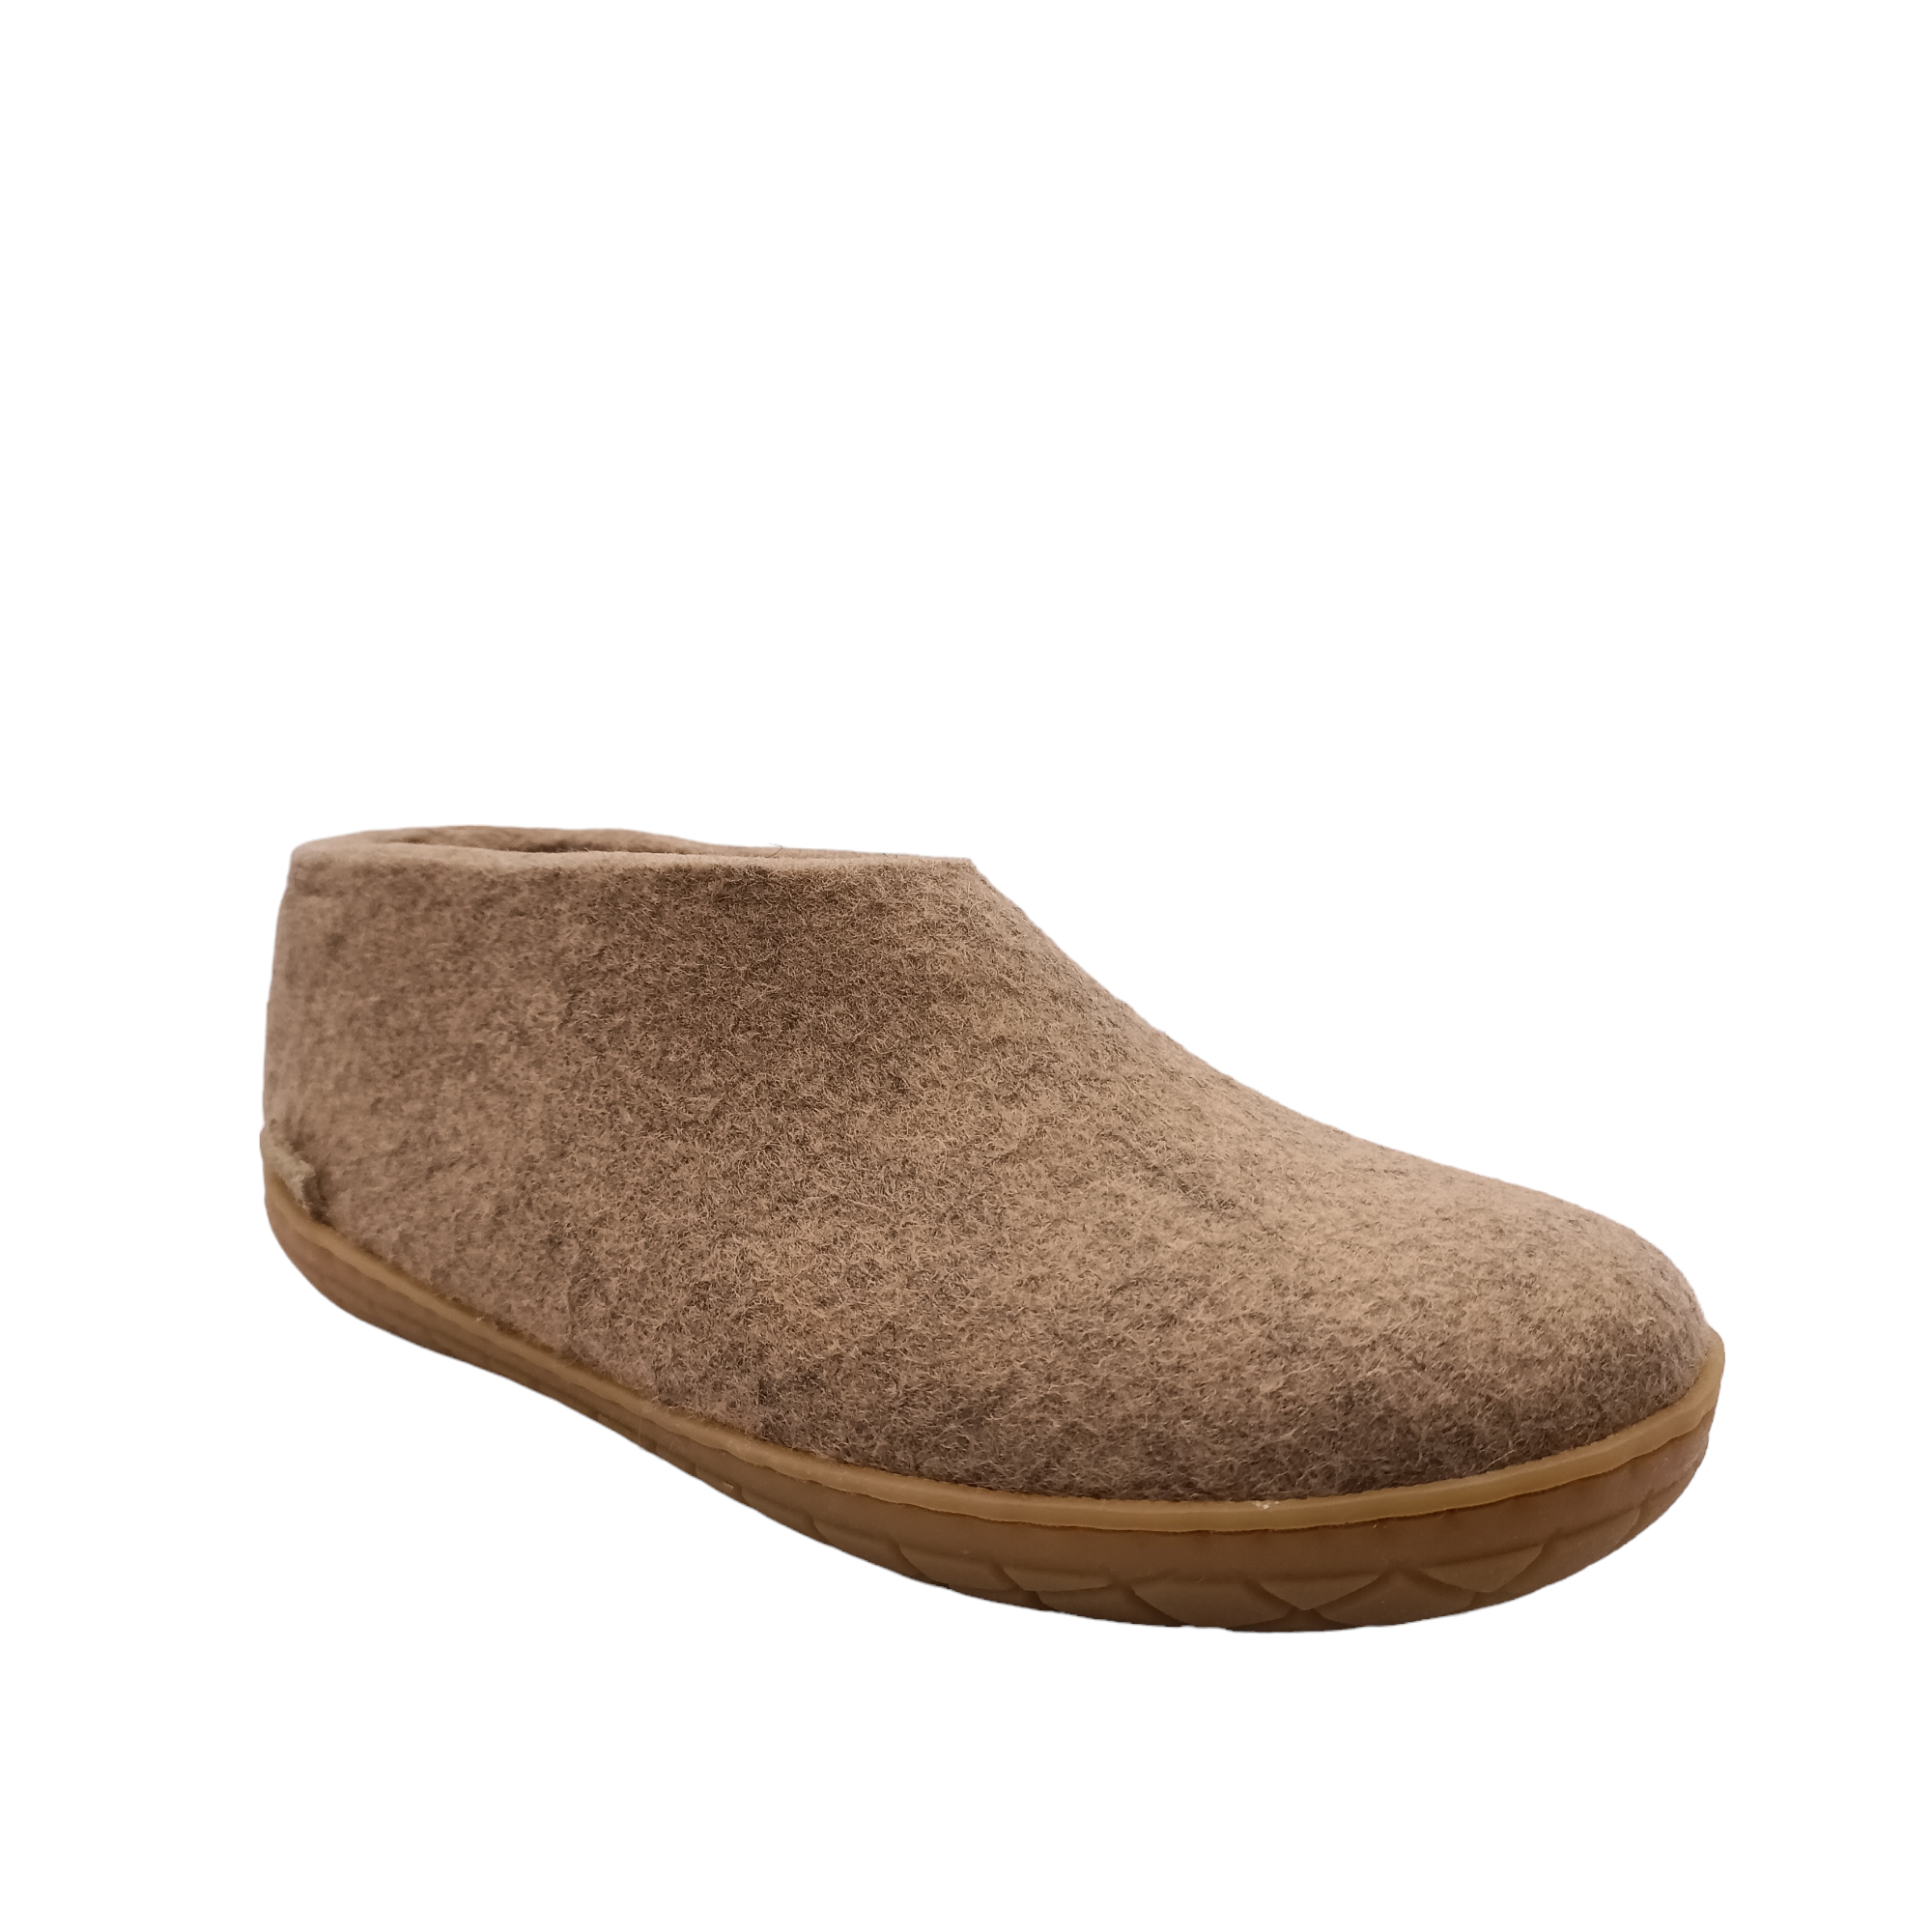 Front angle view off sand coloured felt wool Glerup shoe or slipper. Shop slippers online and instore with shoe&me Mount Maunganui.